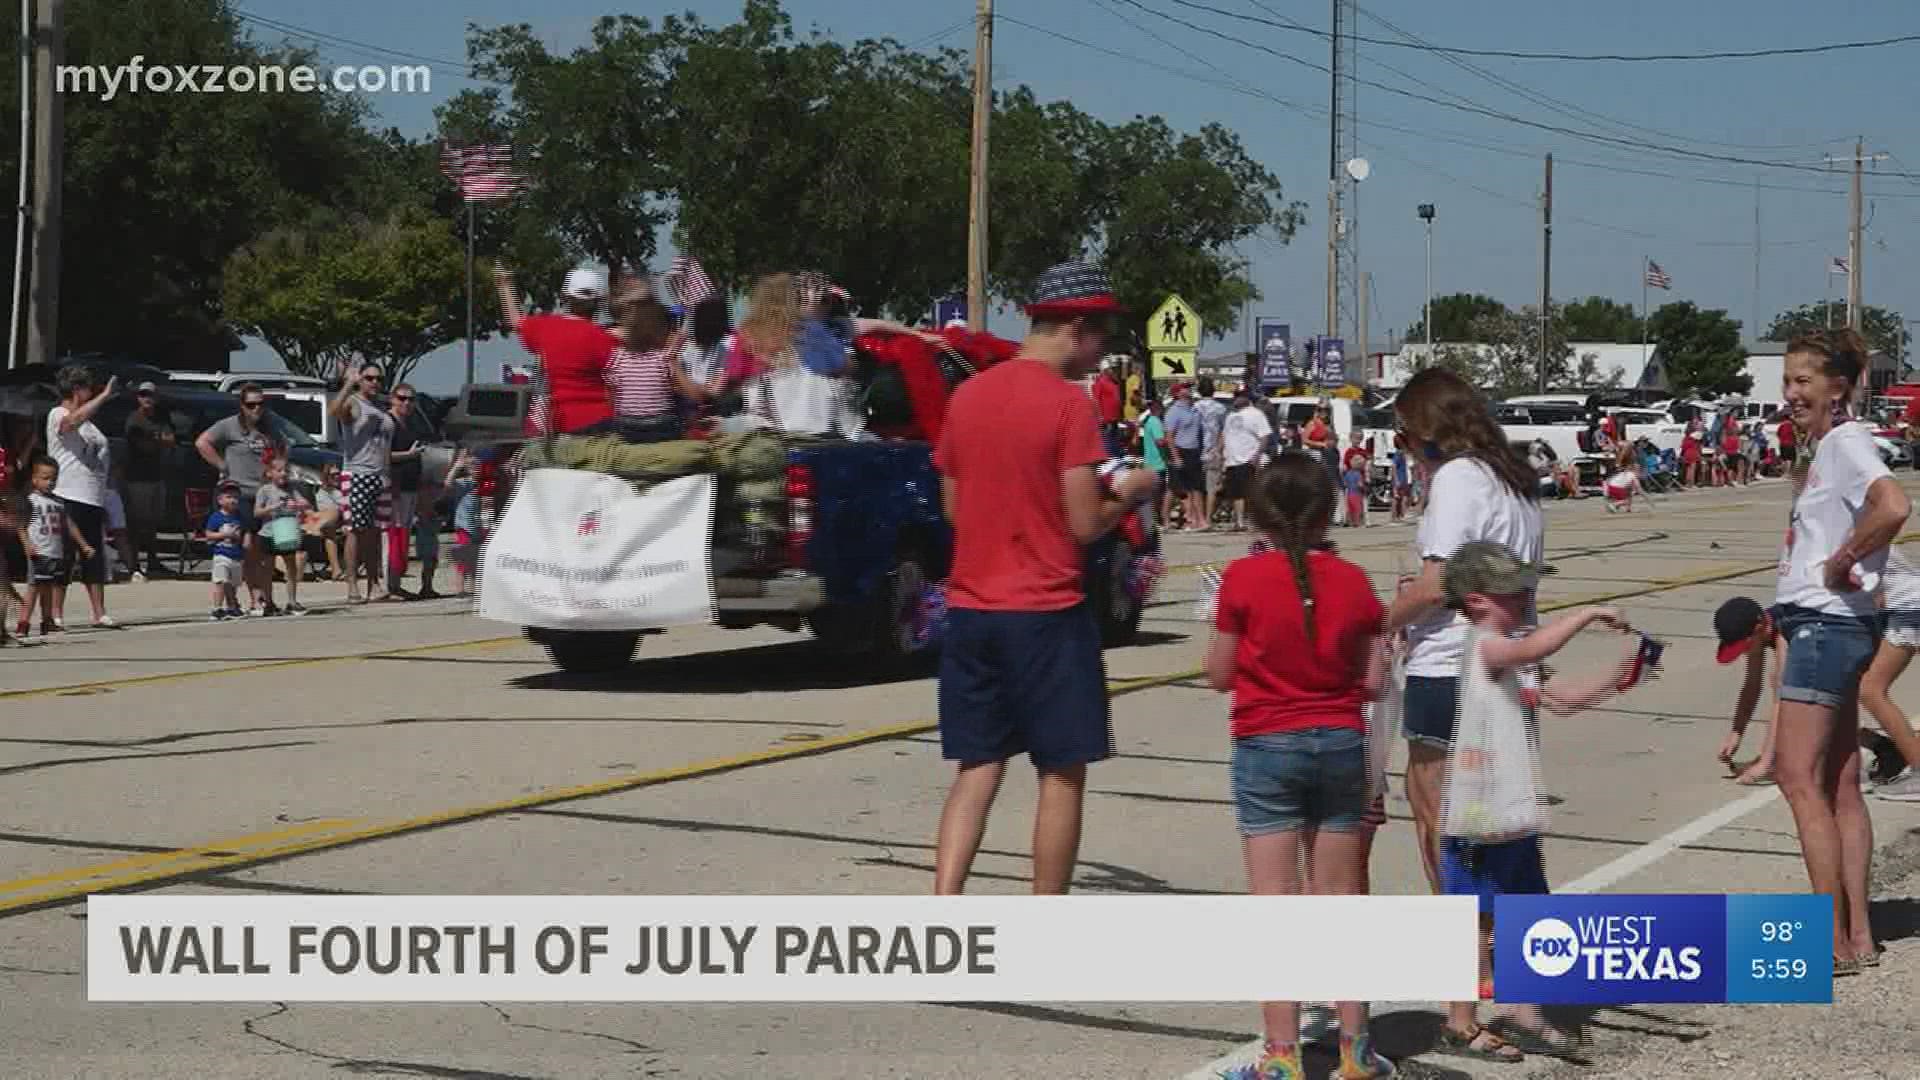 Concho Valley Independence Day festivities continue with the Wall Fourth of July parade.